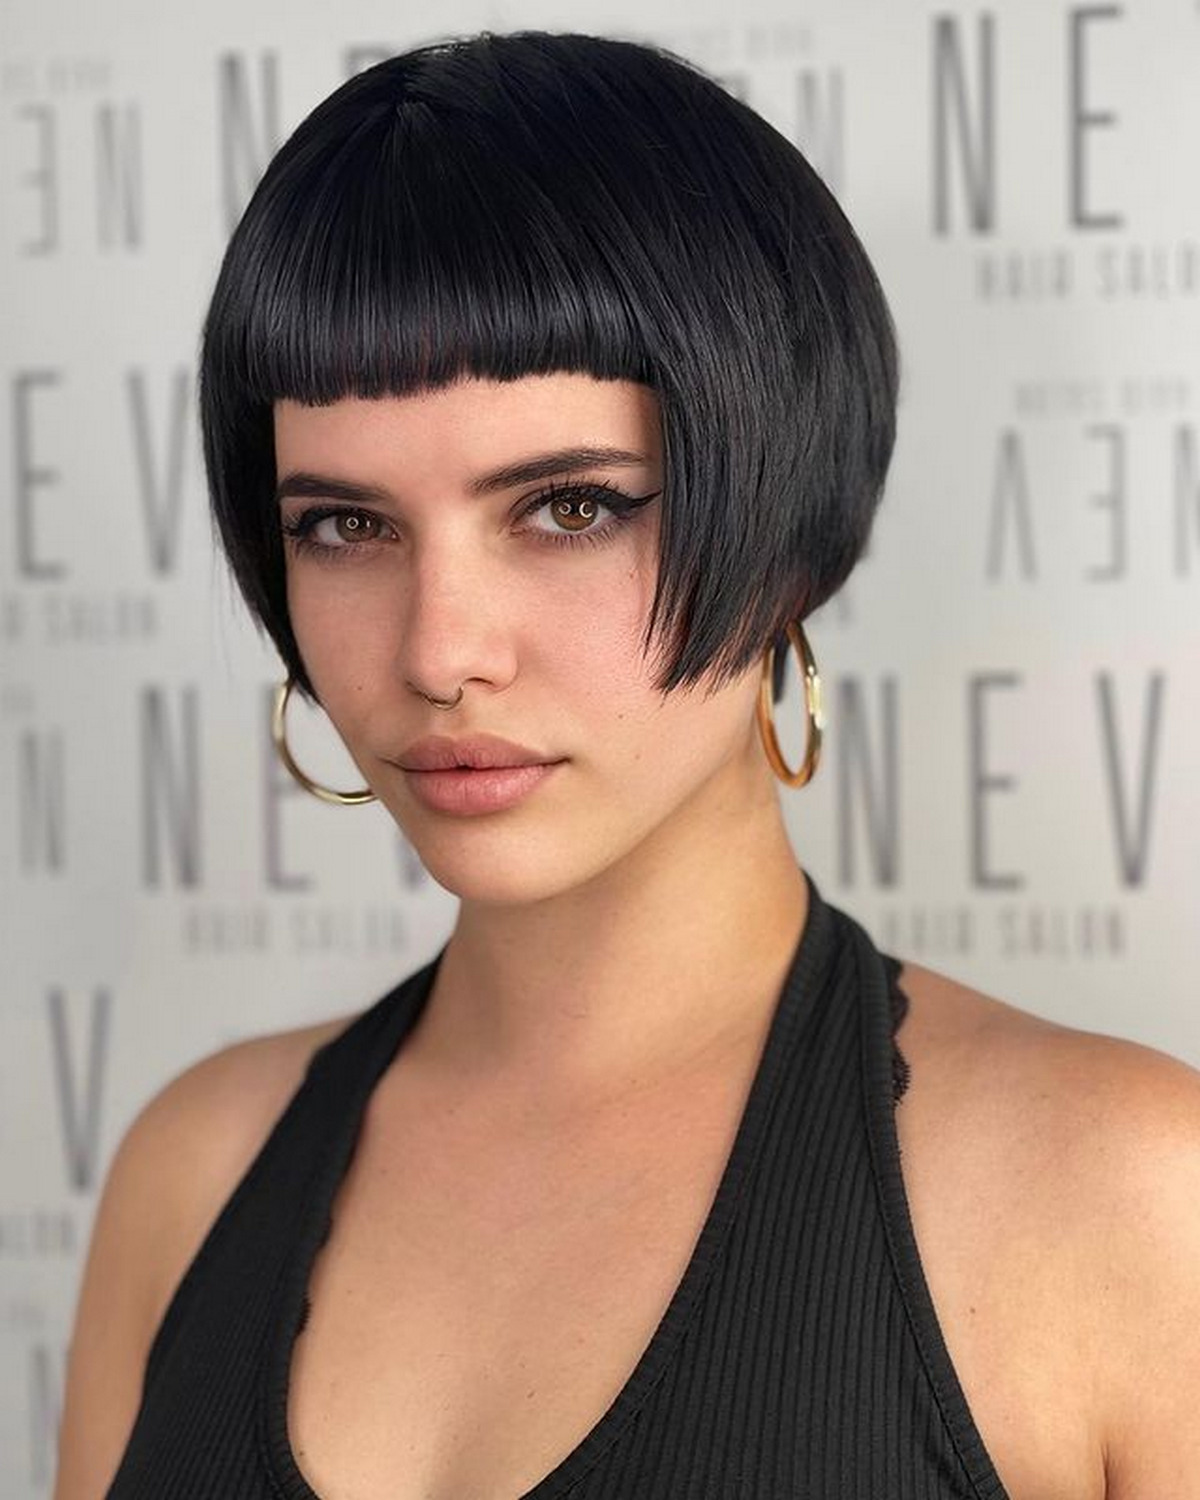 Classy Baby Bangs with a Short Bob